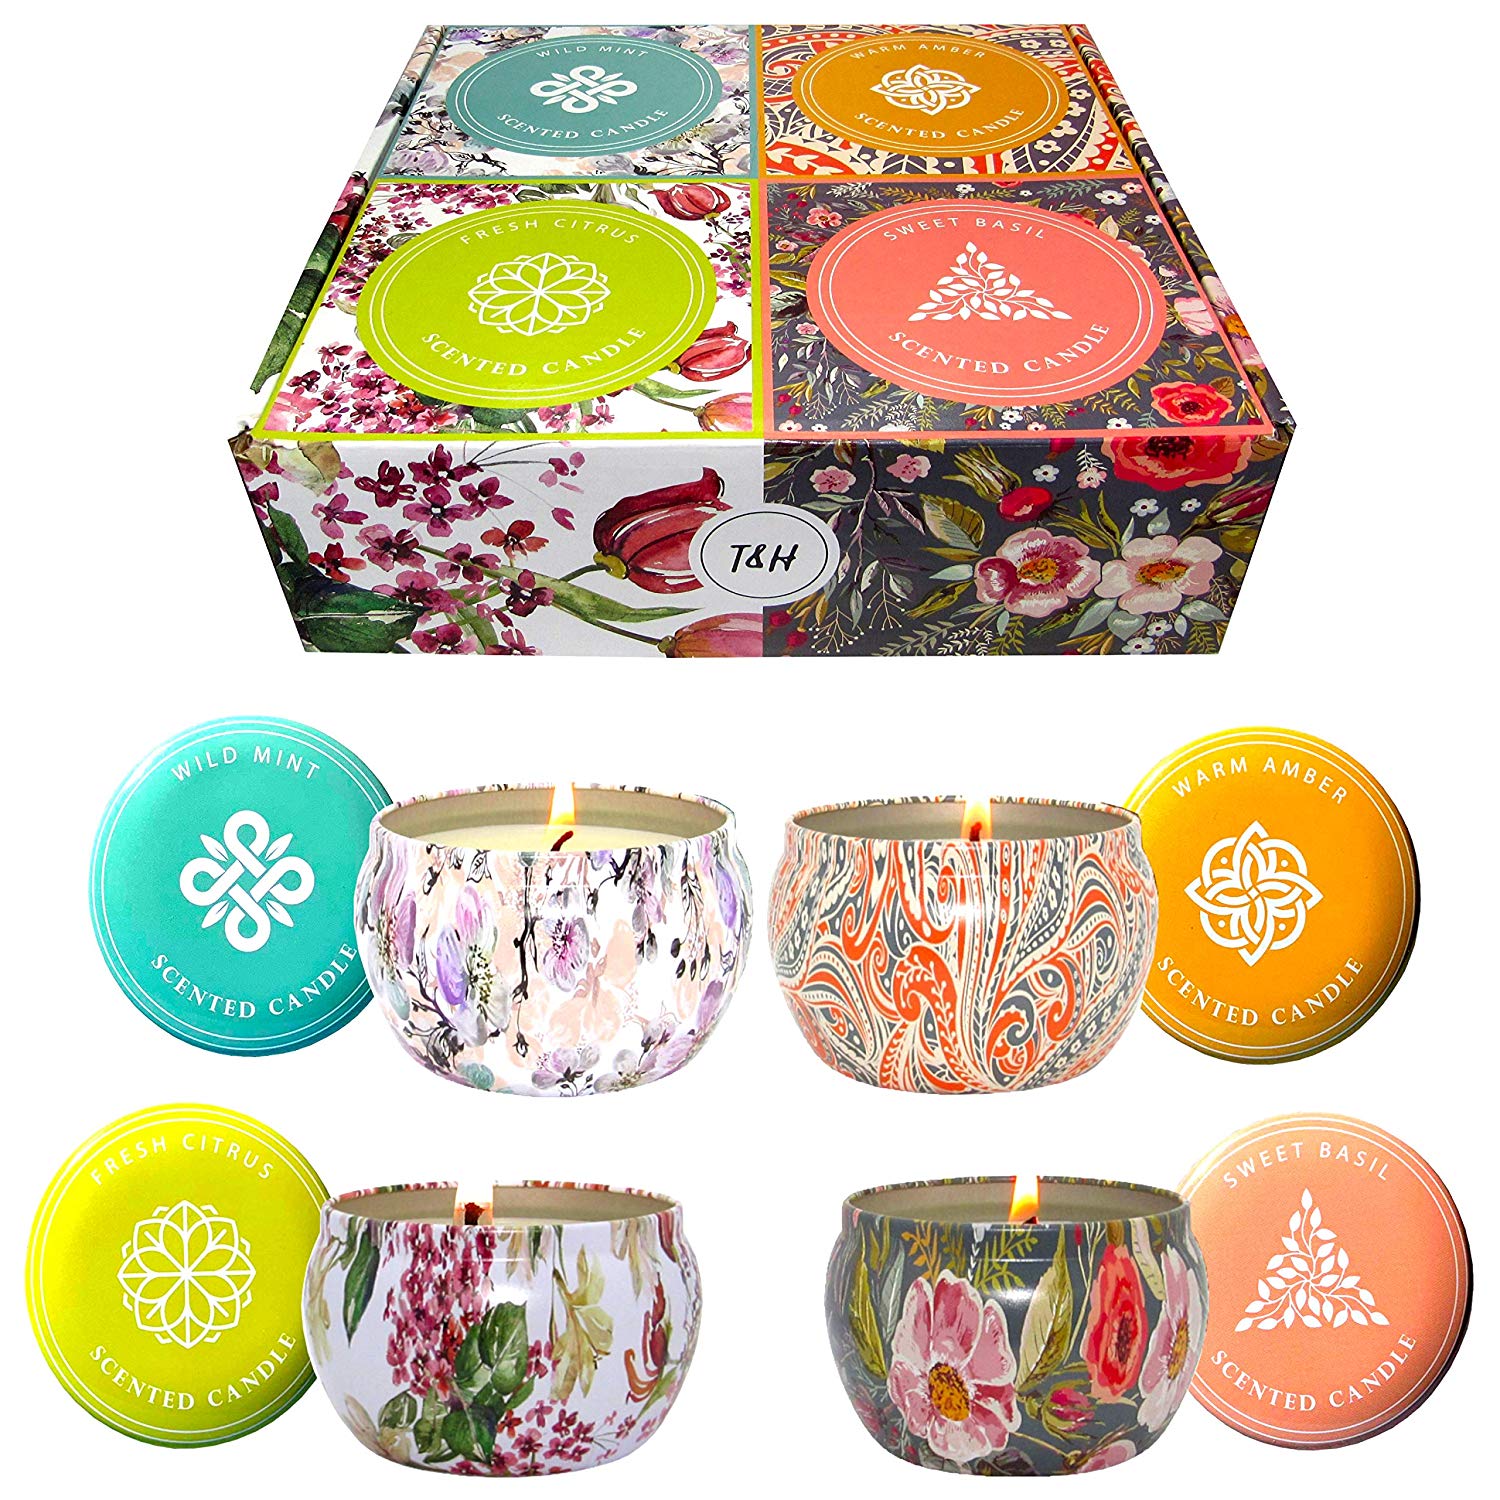 Big Aromatherapy Scented Candles Essential Oils Natural Soy Wax $19.88 (REG $89.99)